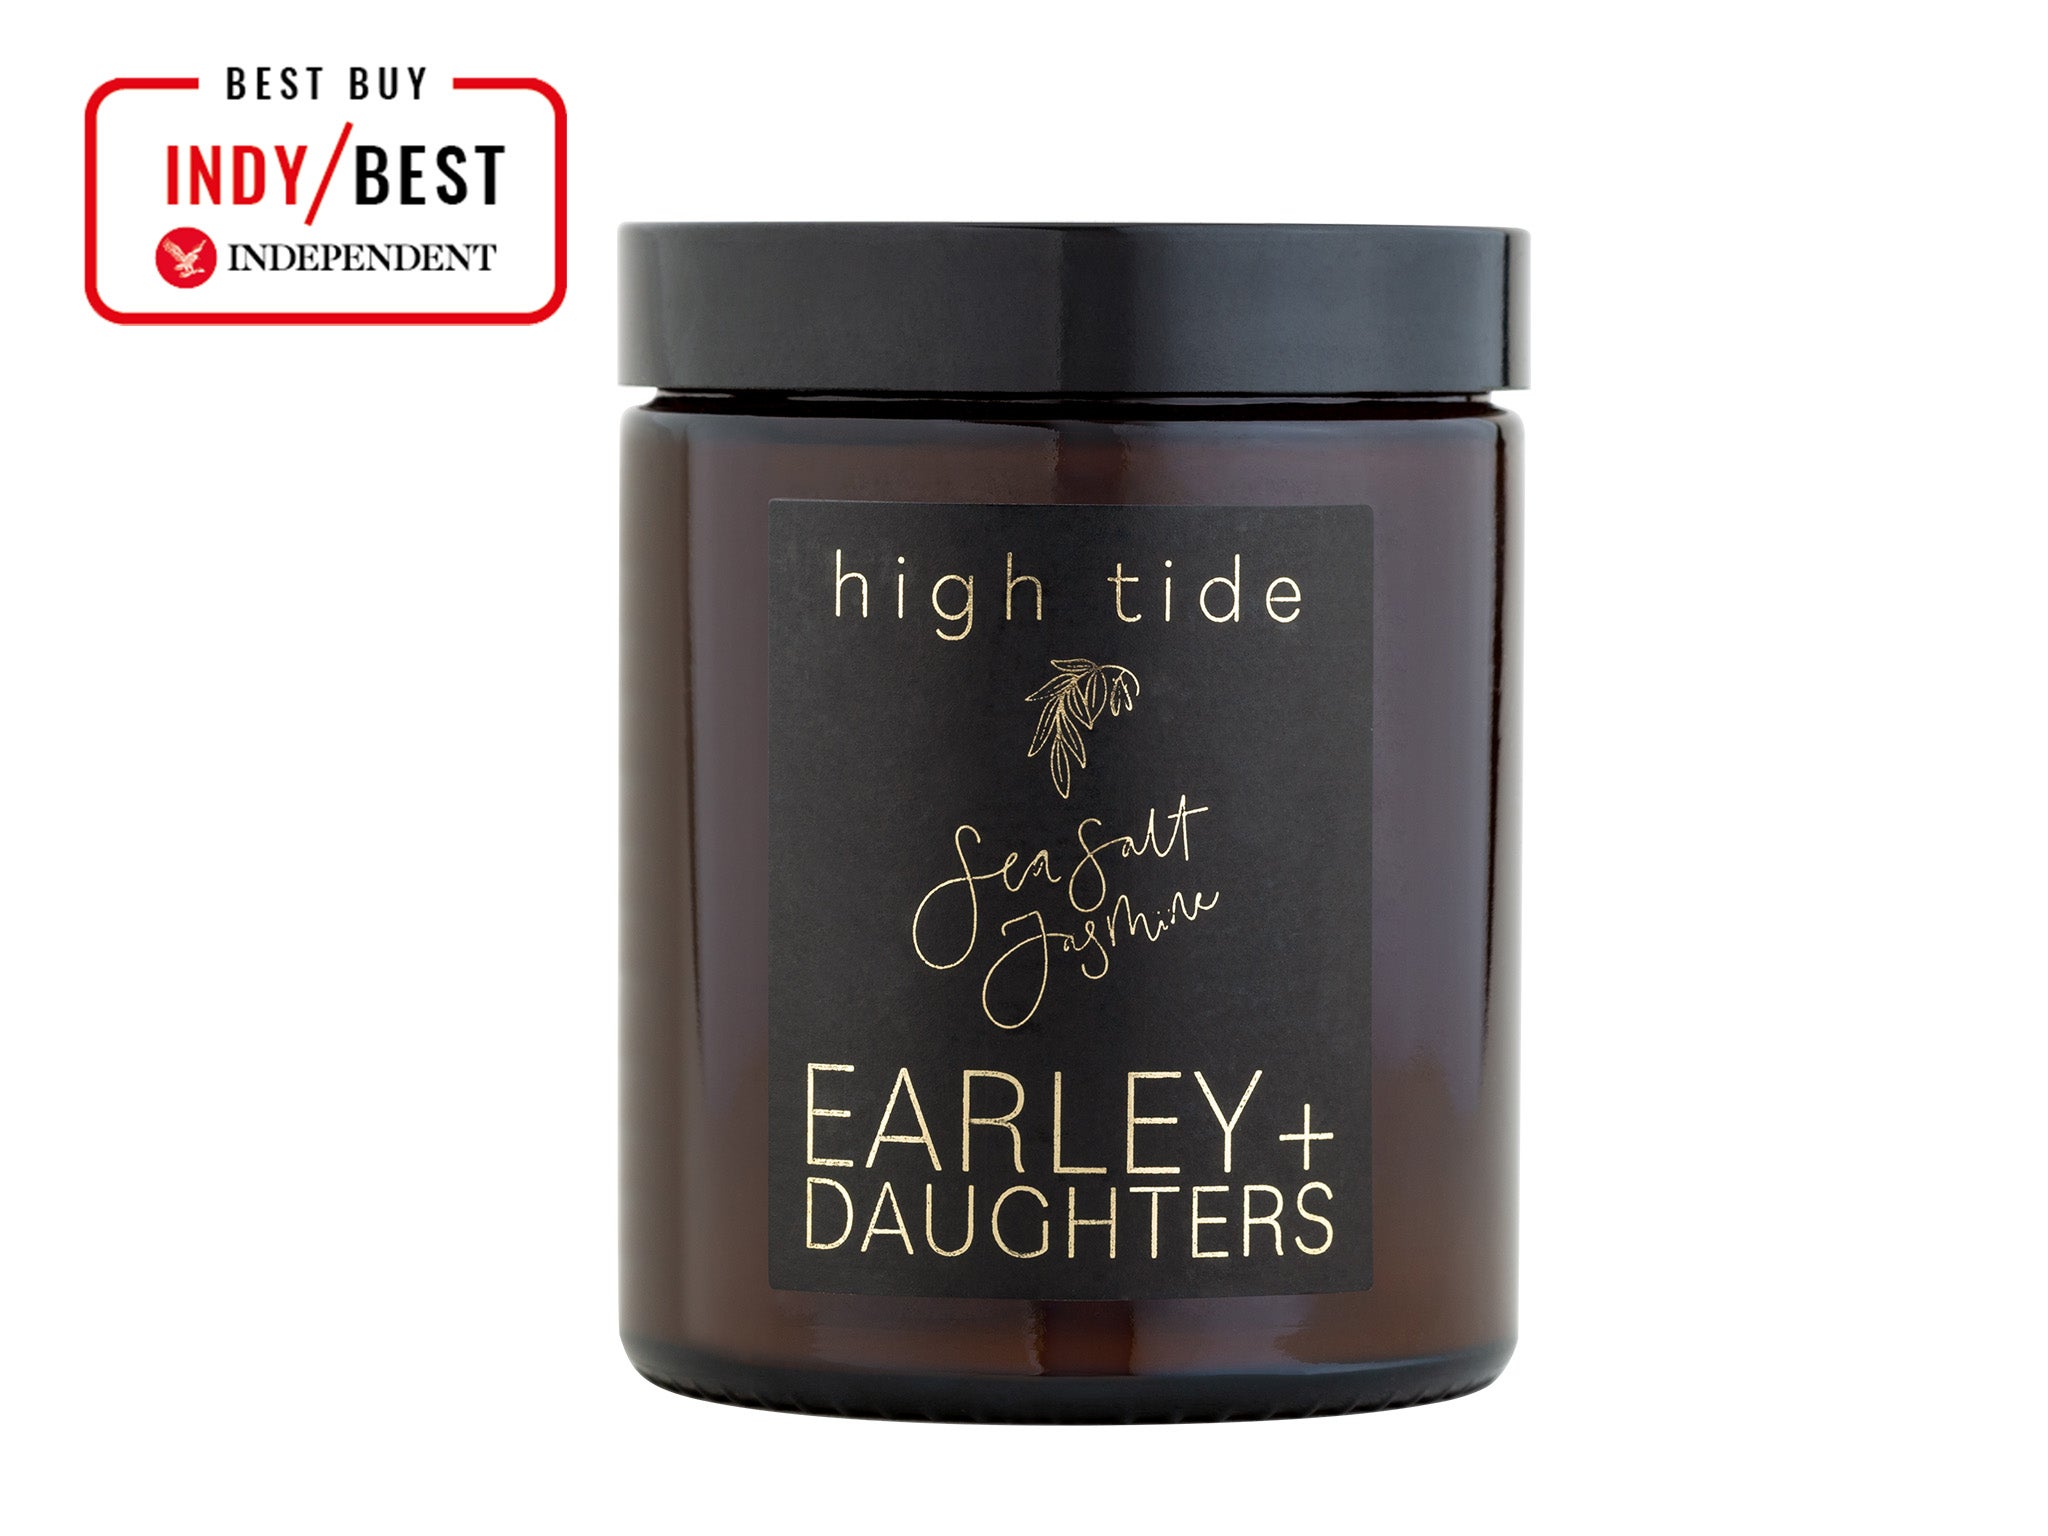 Earley + Daughters high tide candle